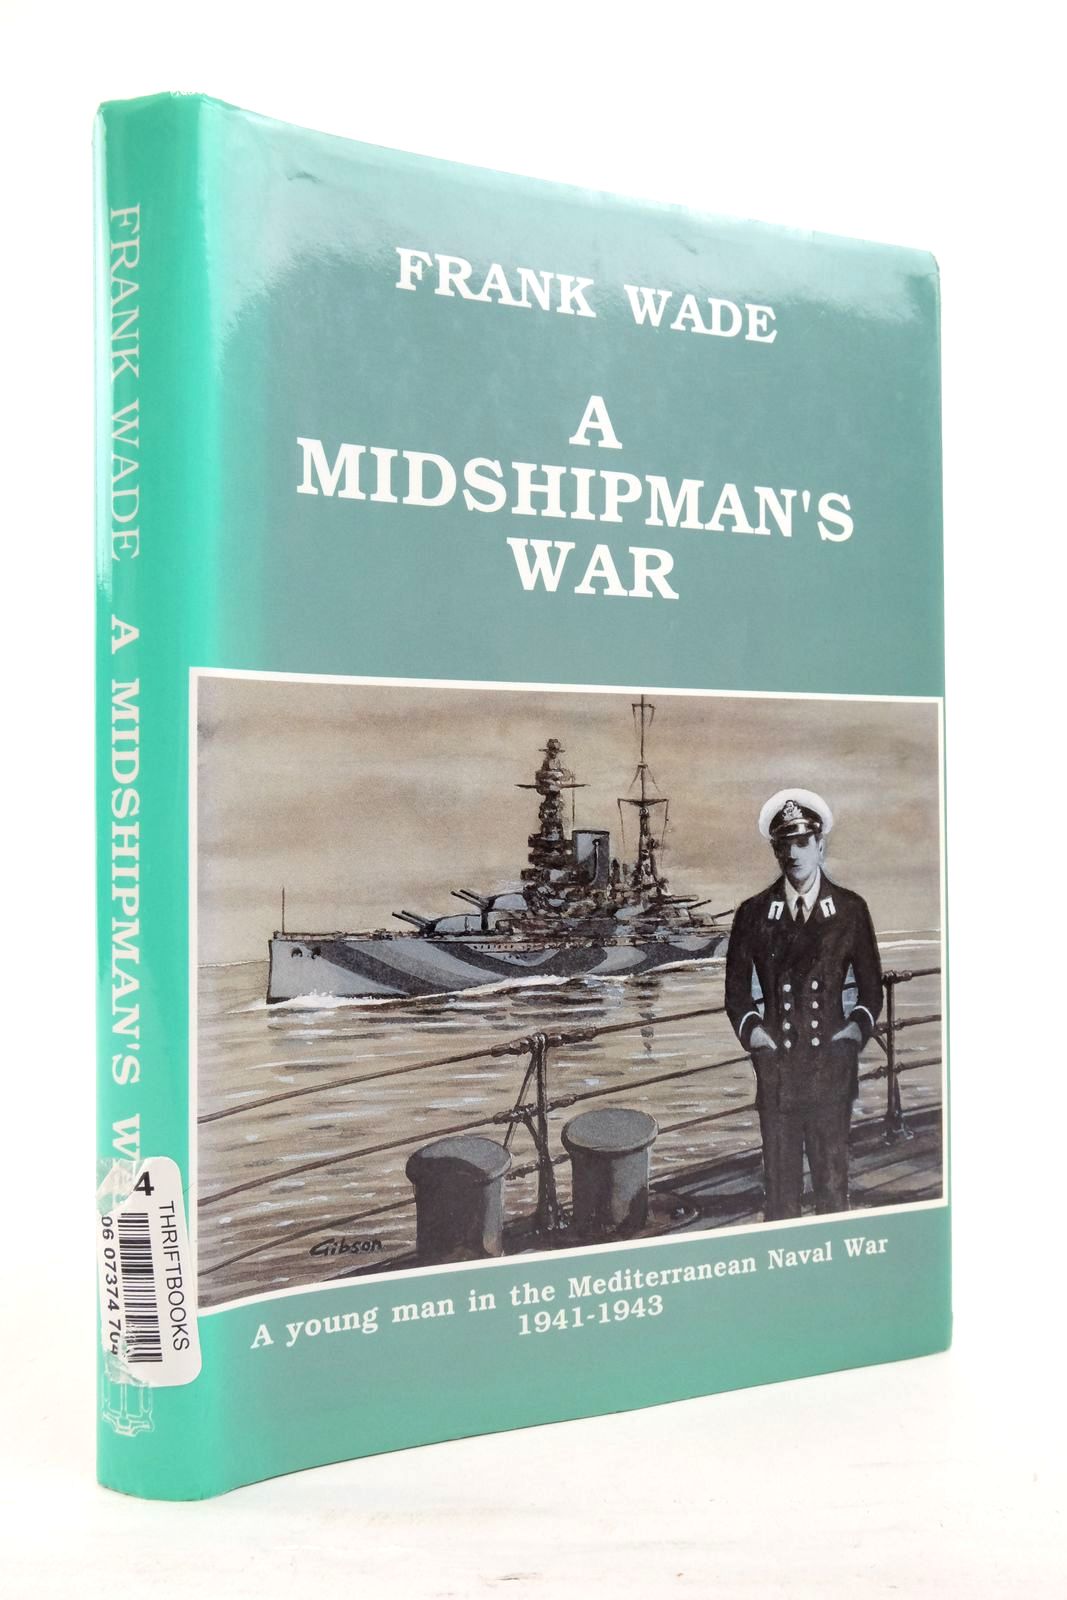 Photo of A MIDSHIPMAN'S WAR: A YOUNG MAN IN THE MEDITERRANEAN NAVAL WAR 1941-1943 written by Wade, Frank published by Cordillera Publishing Company (STOCK CODE: 2138003)  for sale by Stella & Rose's Books